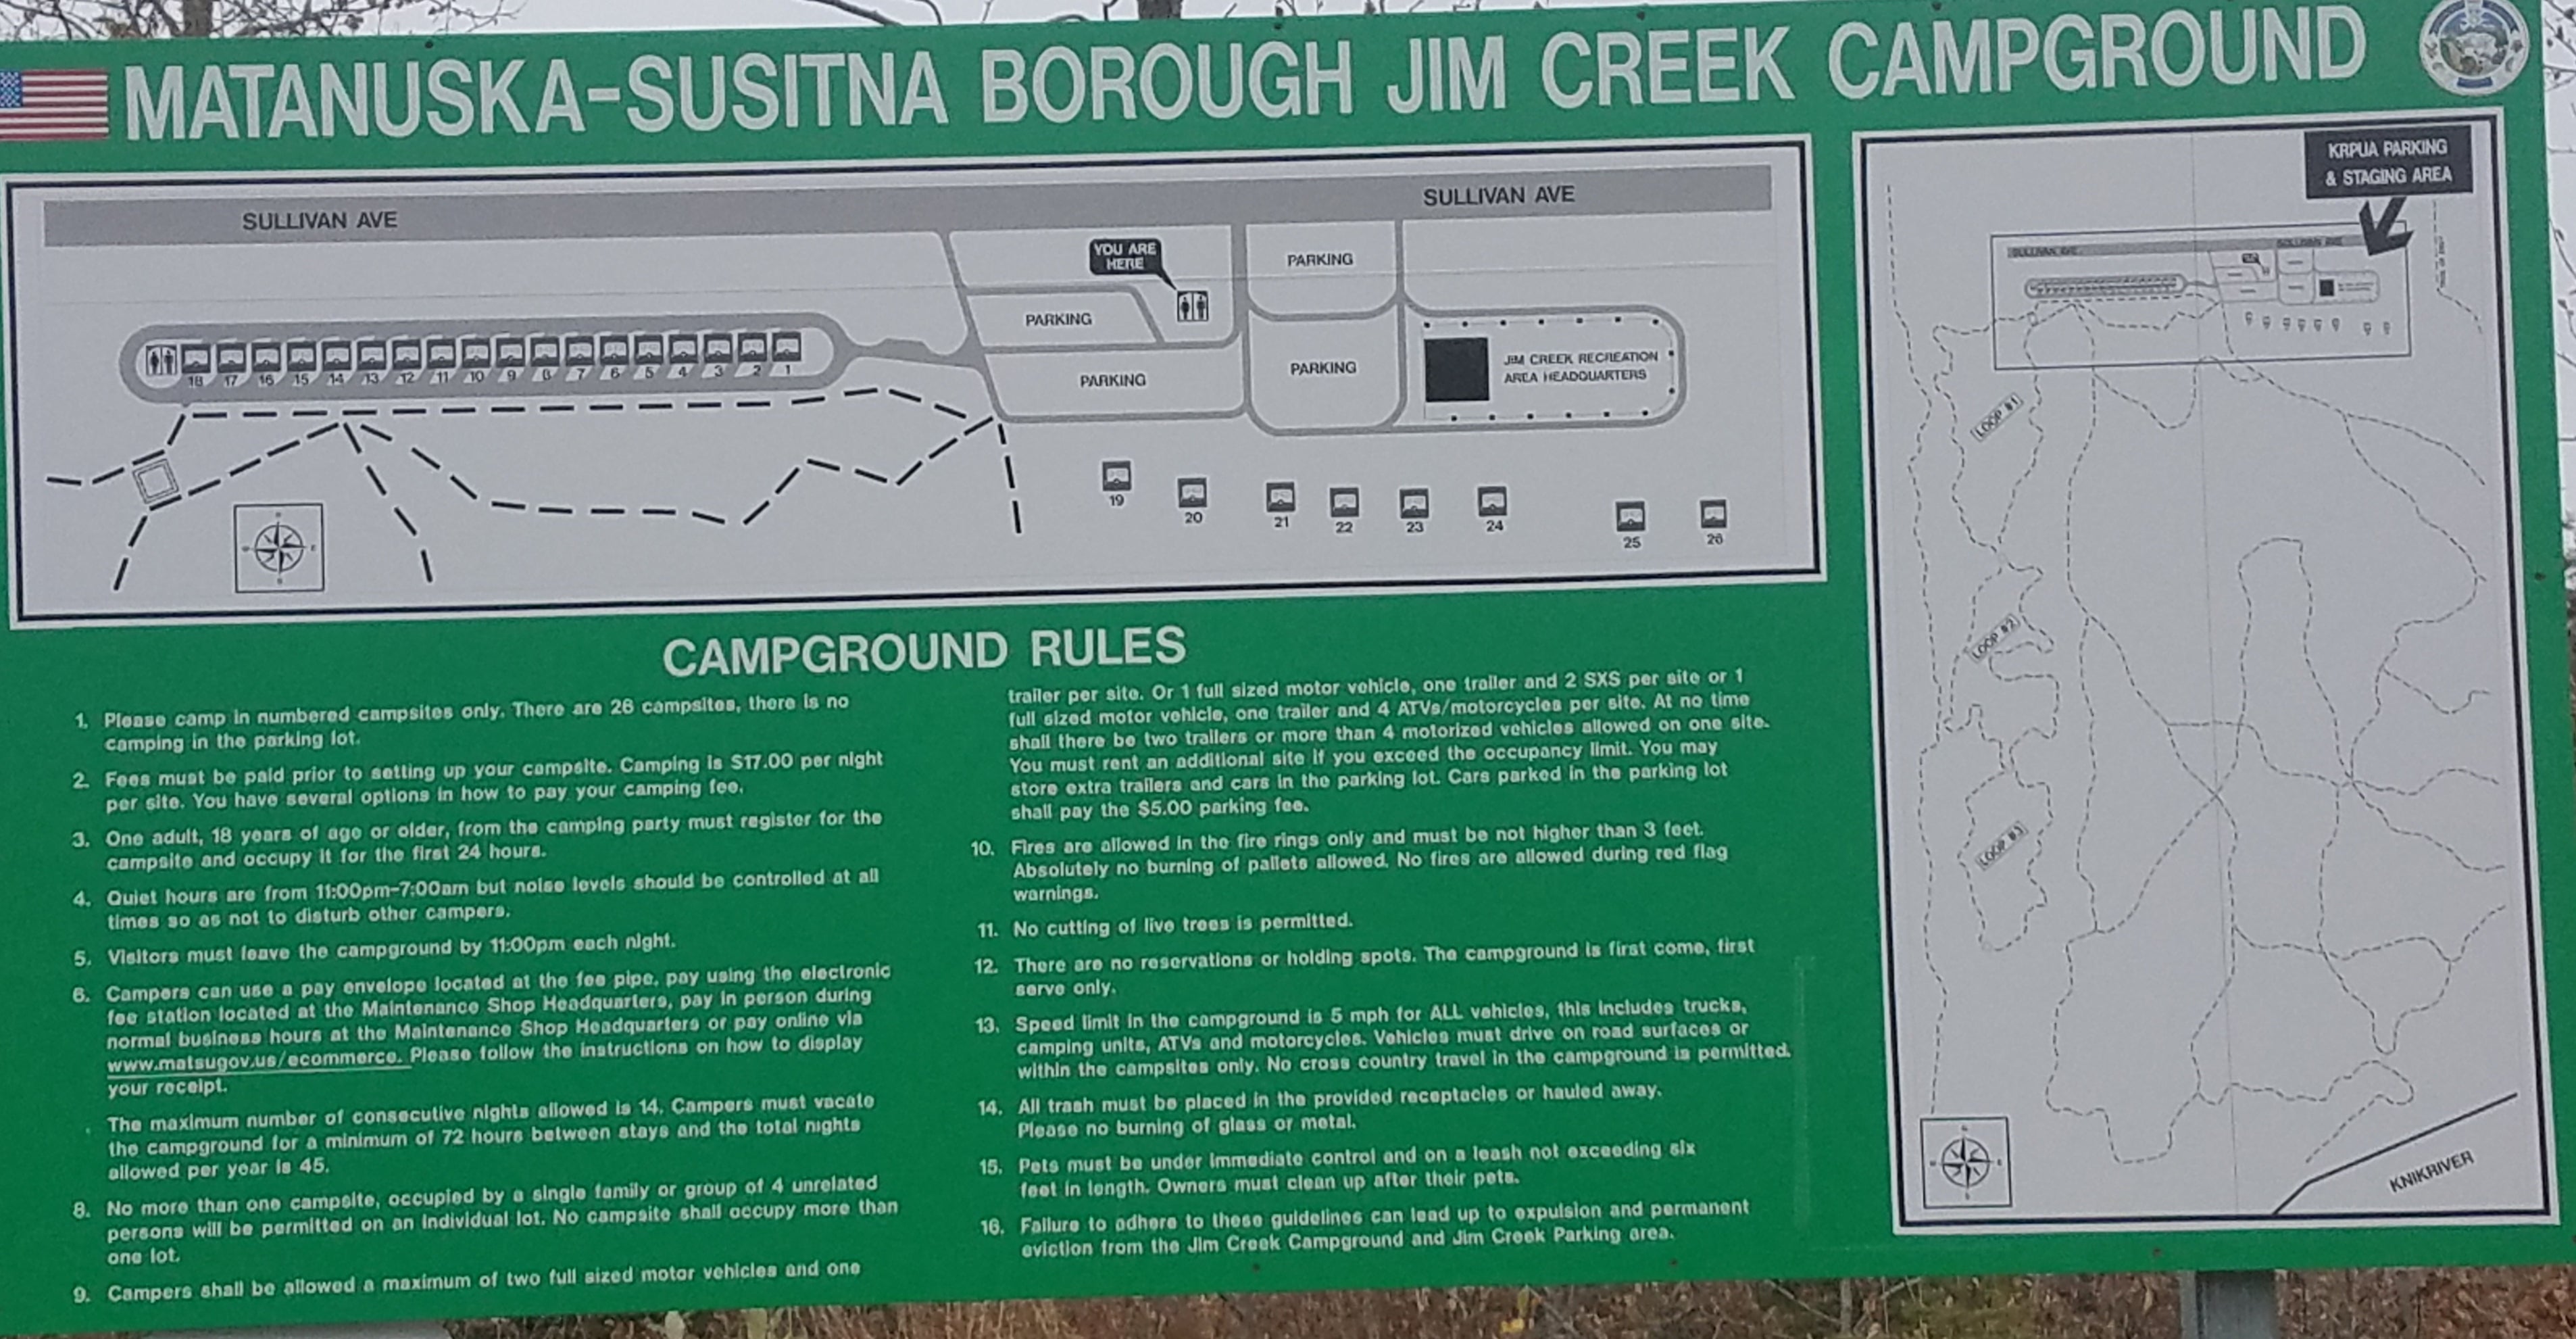 Camper submitted image from Jim Creek Recreational Campground - 4